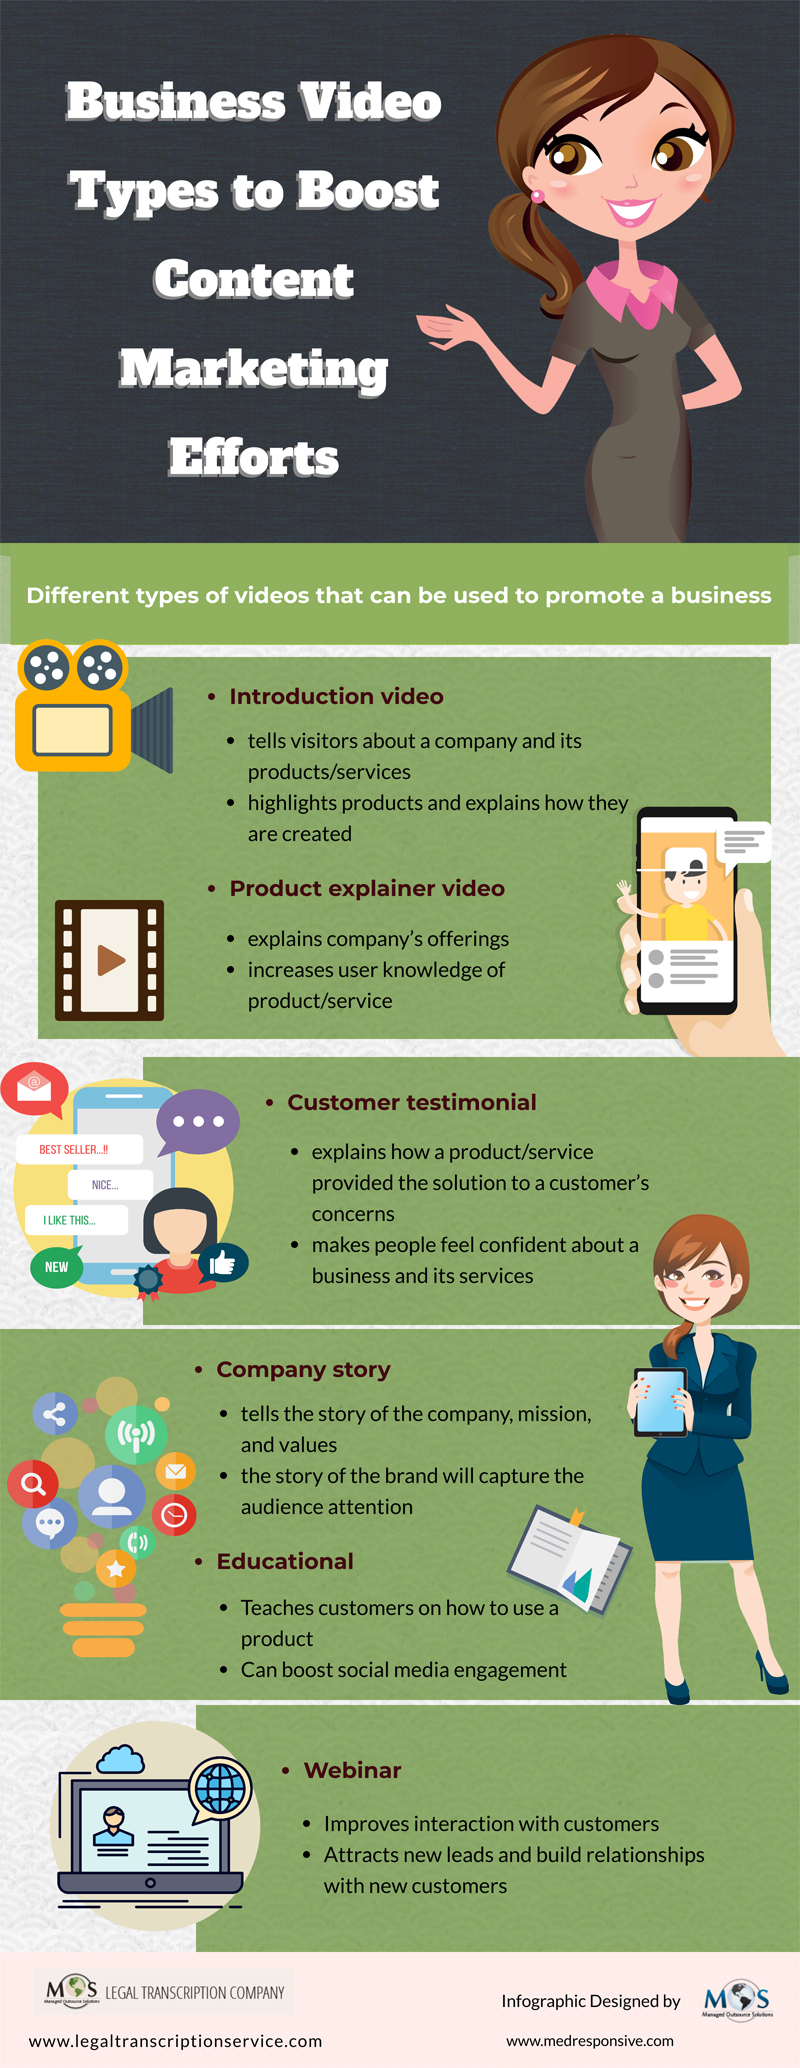 Business Video Types to Boost Content Marketing Efforts